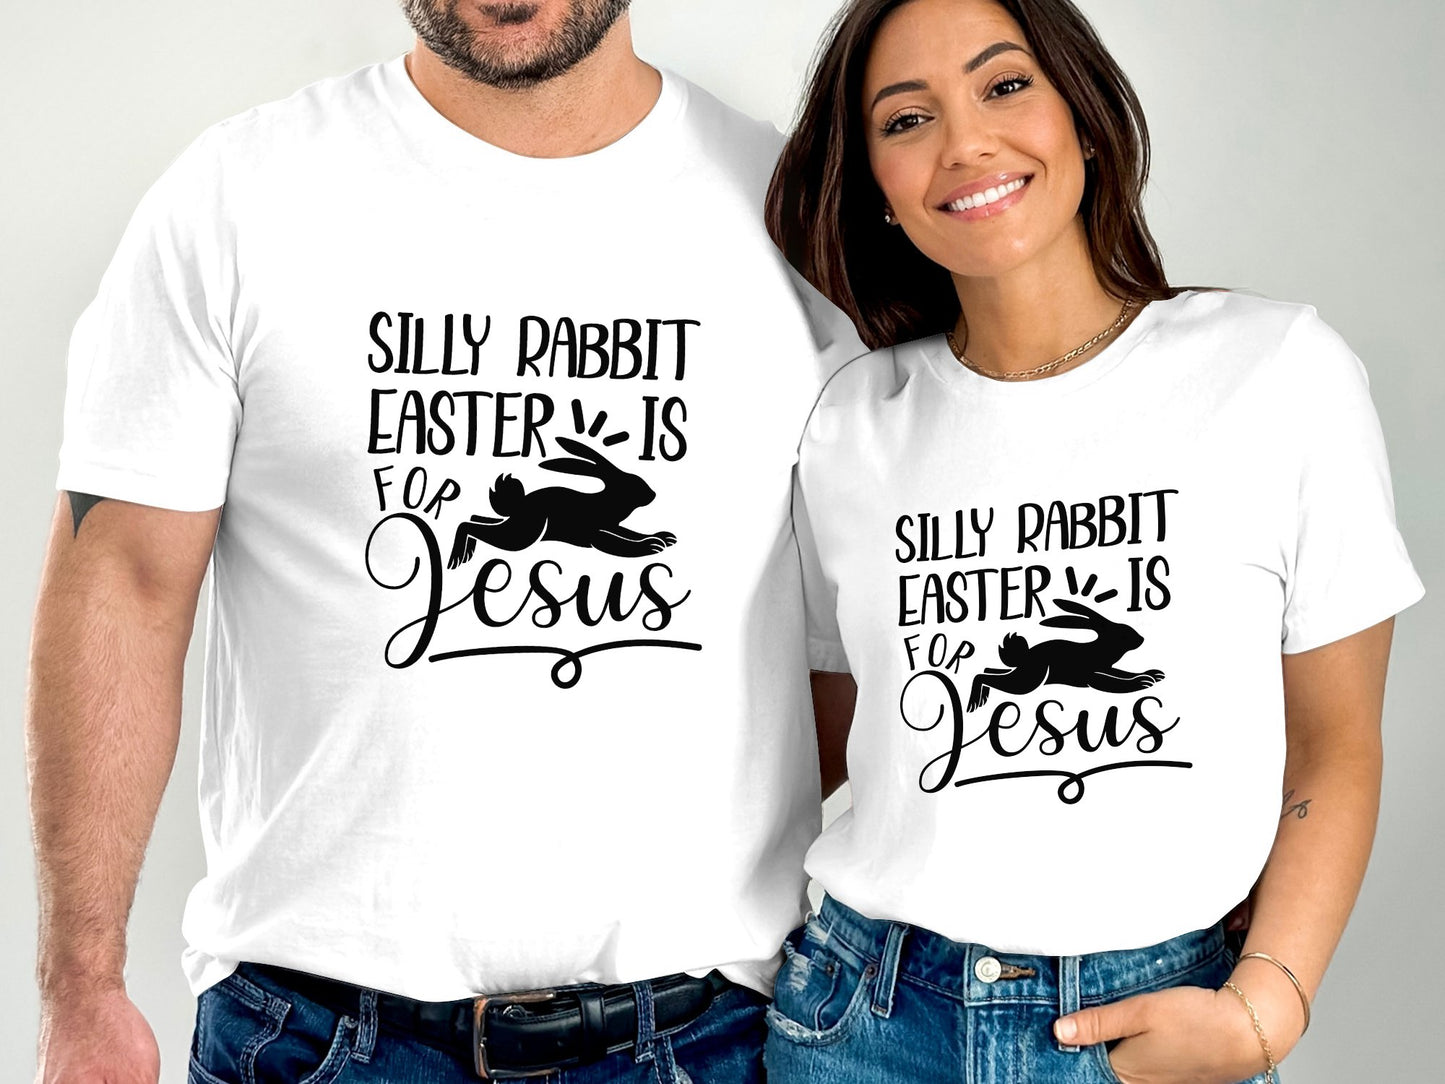 Silly Rabbit Easter is for Jesus 3